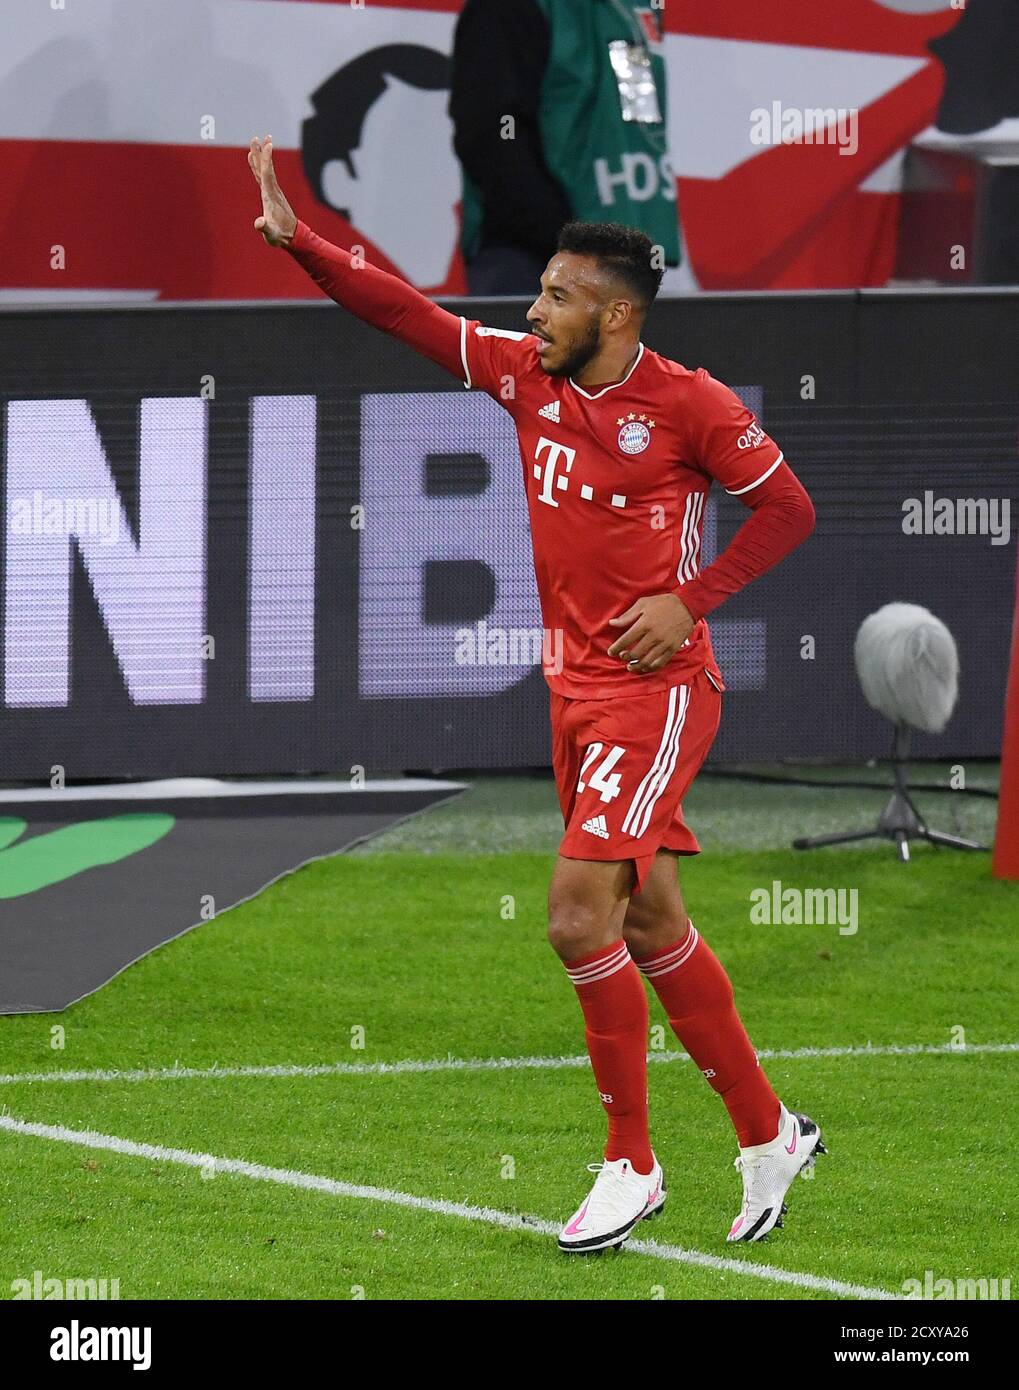 Allianz Arena Munich Germany 30.09.20, Football: German SUPERCUP FINALE 2020/2021, FC Bayern Muenchen (FCB, red) vs Borussia Dortmund  (BVB, yellow) 3:2 — Corentin Tolisso (FC Bayern Muenchen) celebrates after his goal Foto: Markus Ulmer/Pressefoto Ulmer/Pool/via Kolvenbach  DFL regulations prohibit any use of photographs as image sequences and/or quasi-video. Stock Photo